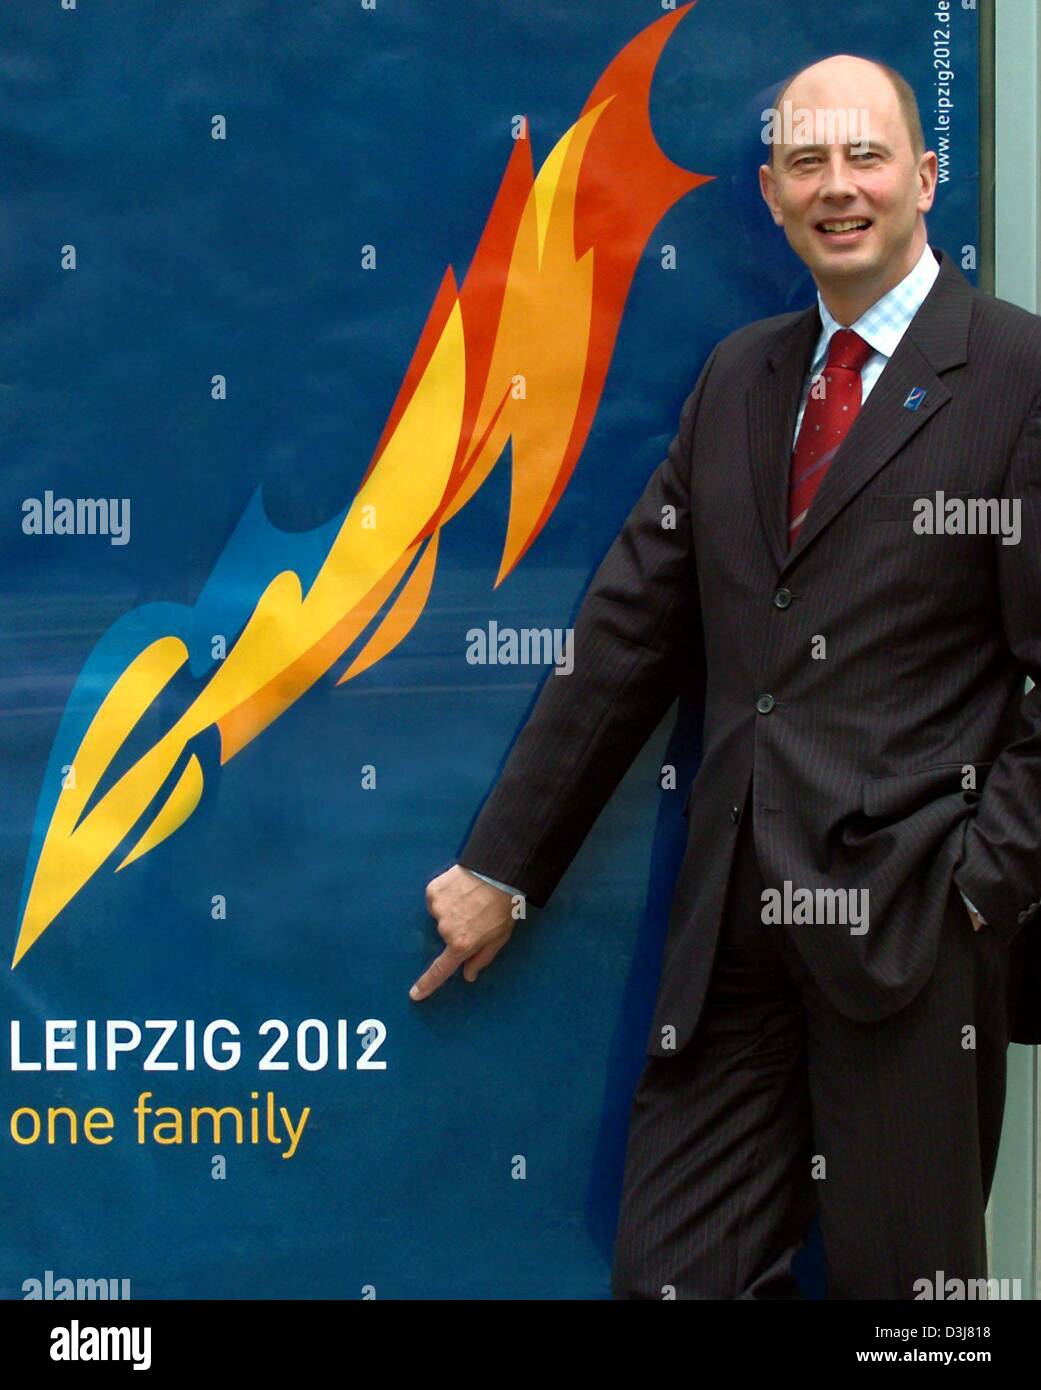 (dpa) - Leipzig mayor Wolfgang Tiefensee smiles in front of a billboard featuring the logo of his city's bid for the Olympic Games in 2012 in front of the city hall in Leipzig, Germany, 14 May 2004. Under the motto 'Wer nicht kaempft, hat schon verloren' (You have already lost if you don't fight) he eagerly awaits the IOC's decision about Leipzig becoming a candidate city for the O Stock Photo